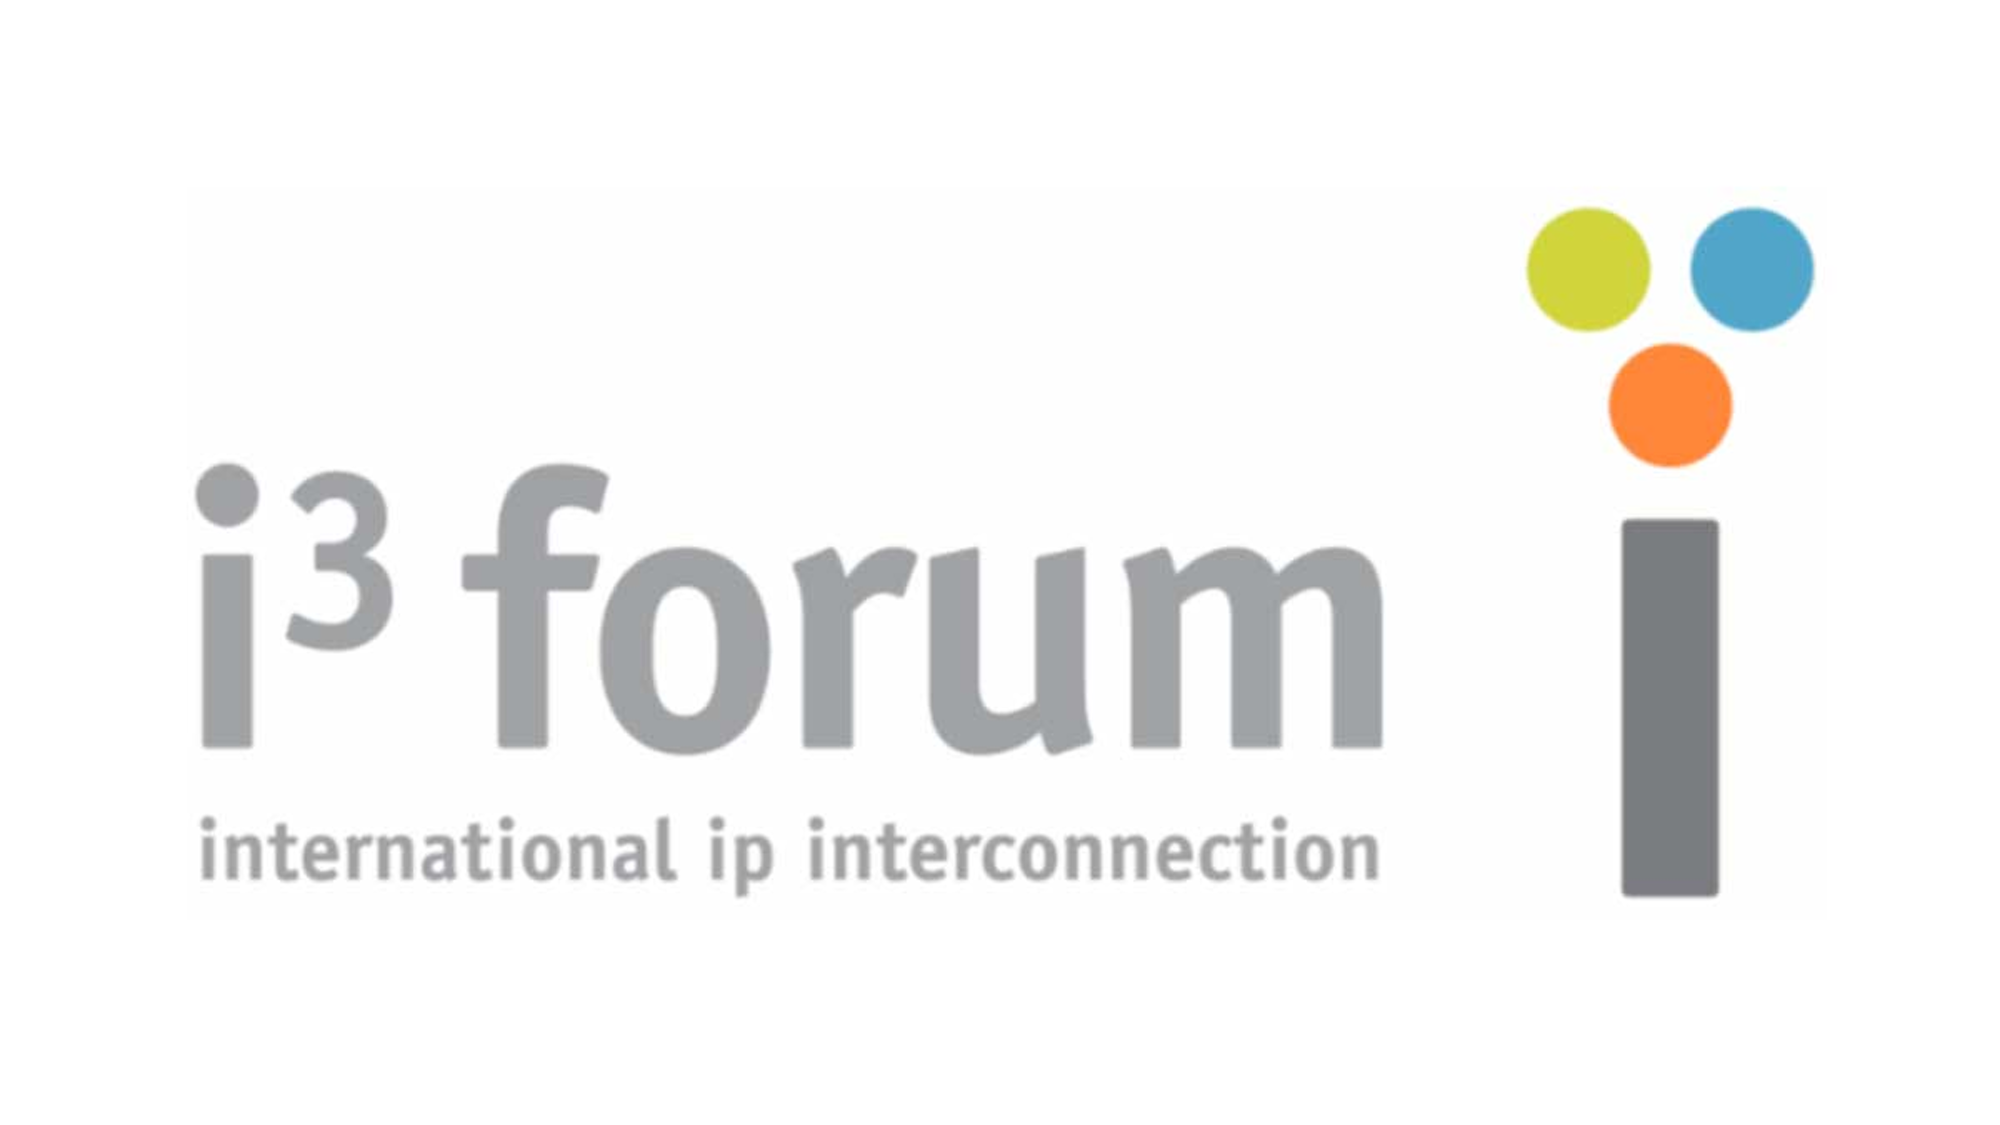 XConnect CEO Eli Katz Joins i3forum’s Board Members  to Drive Trust in International Voice and A2P Messaging